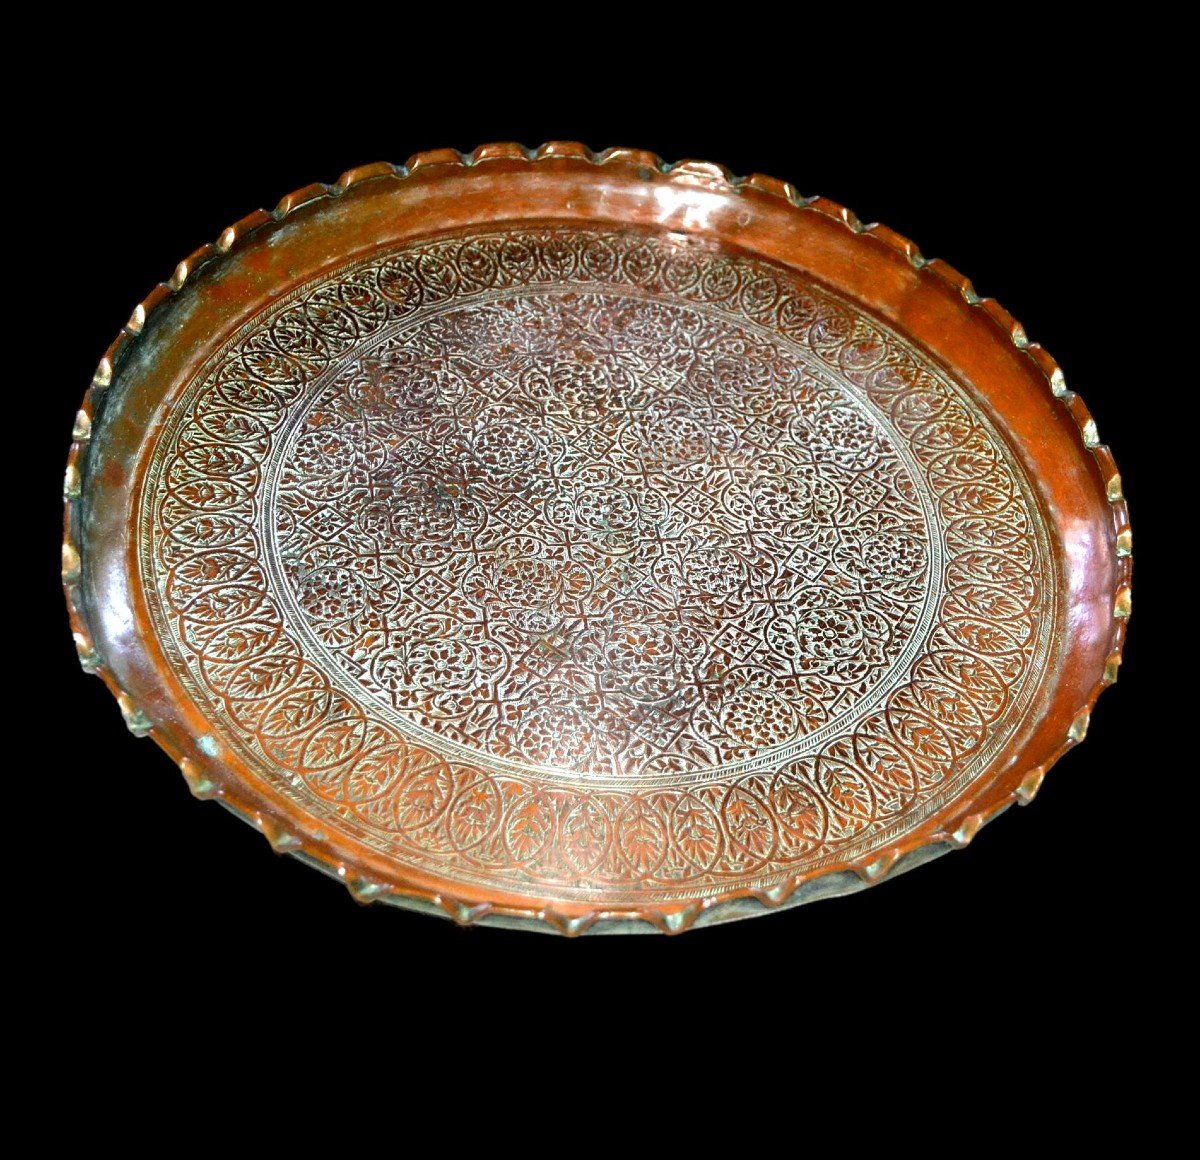 Oriental Tray With Floral Decoration Engraved With A Chisel, Red Copper, Turkey From The 19th Century-photo-2